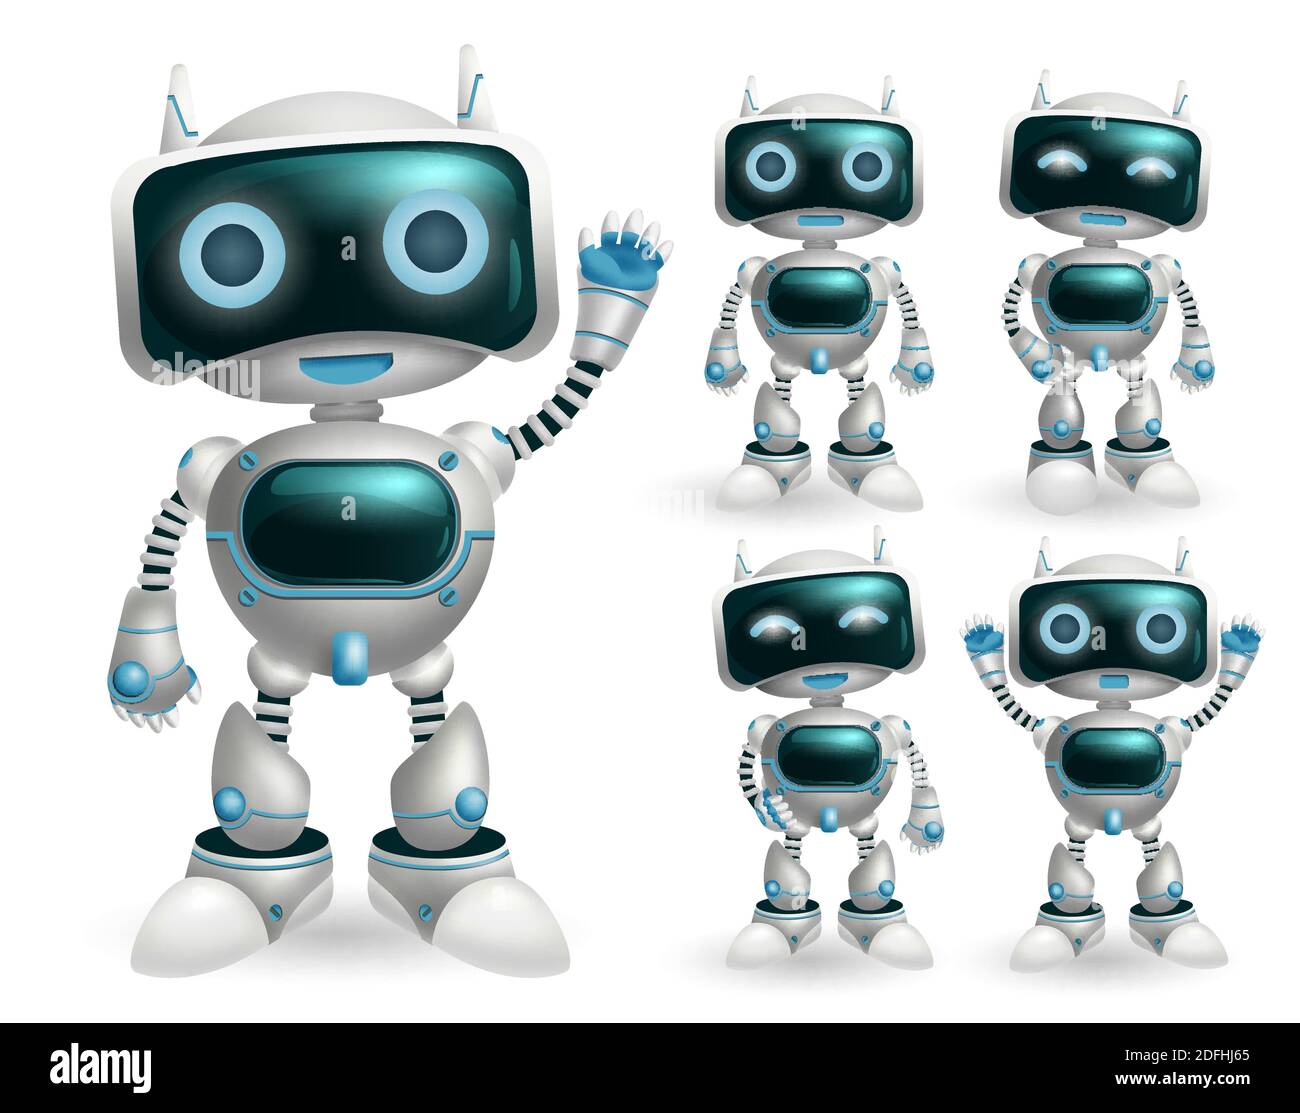 Robot vector character set. Robotic characters in standing pose and gestures in modern design for toy robots game cartoon collection. Stock Vector